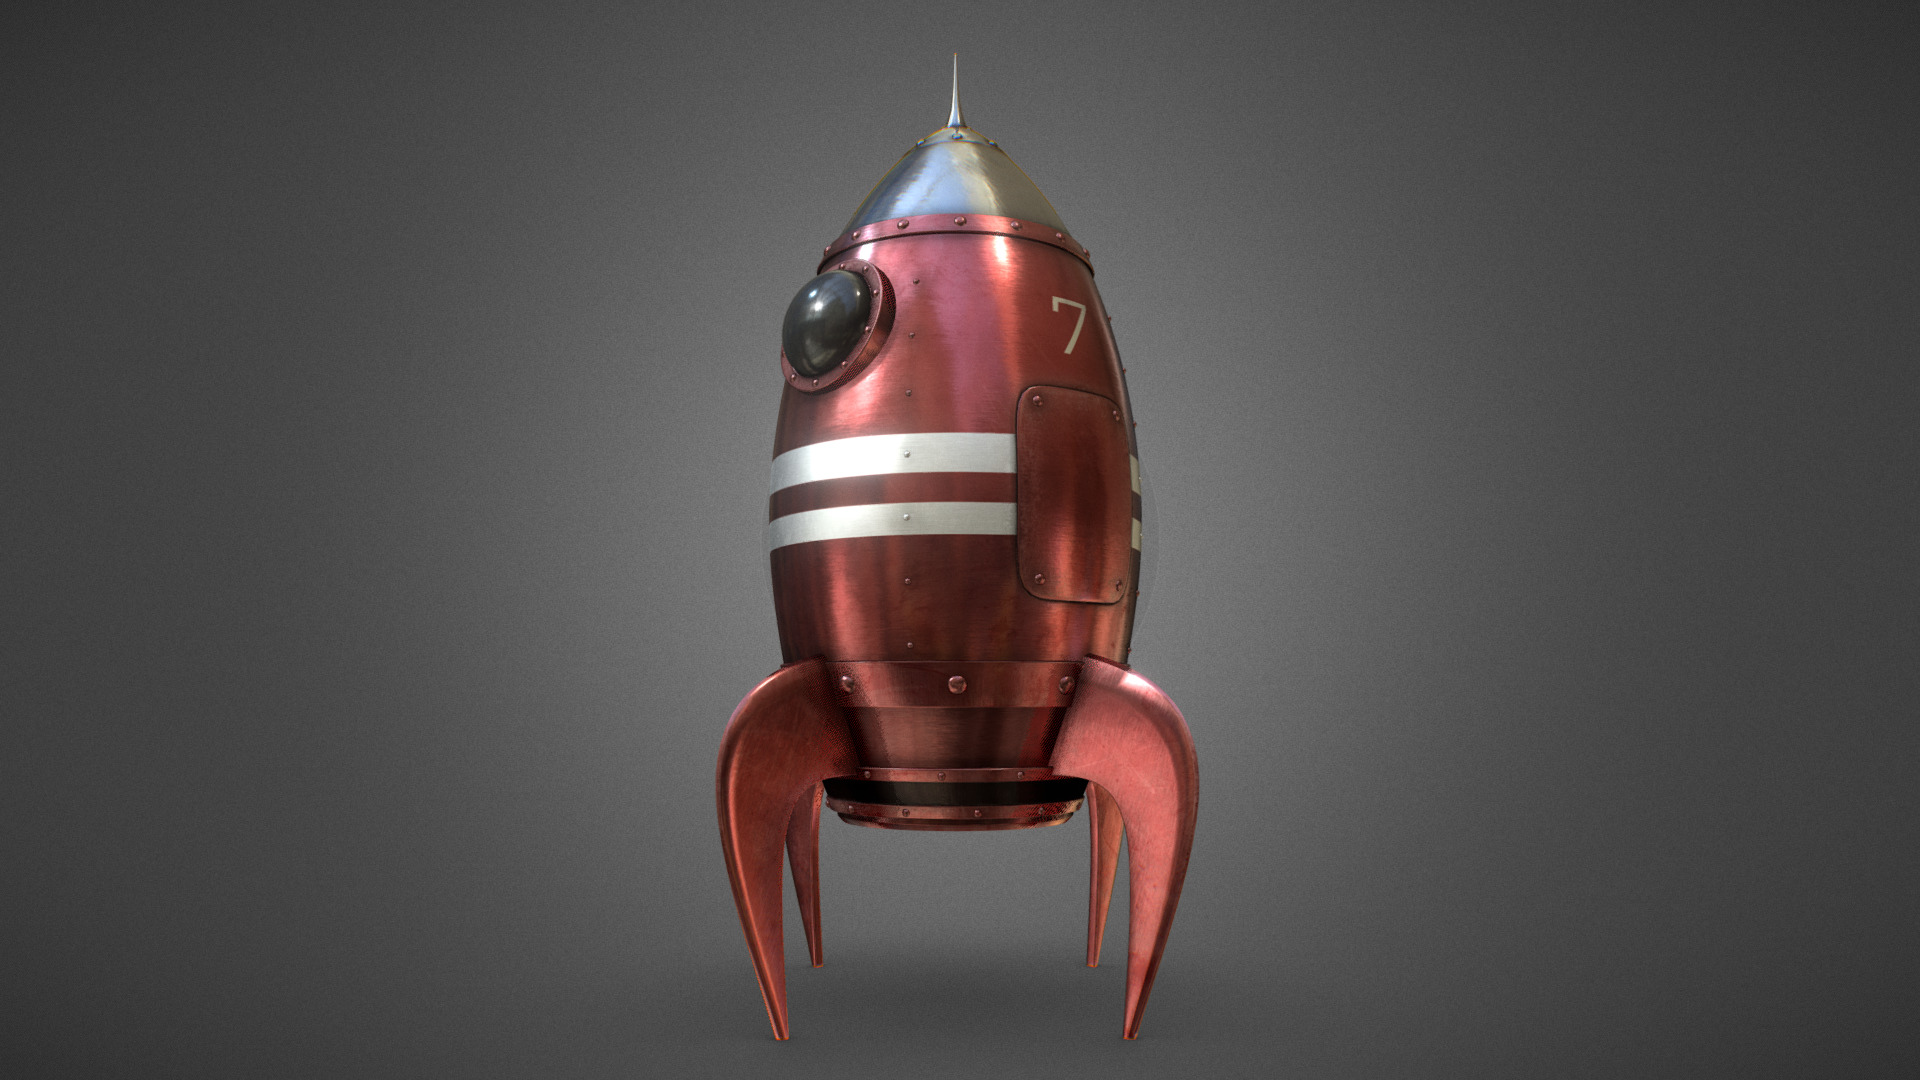 3D model Retro Rocket Toy - This is a 3D model of the Retro Rocket Toy. The 3D model is about a red and white robot.